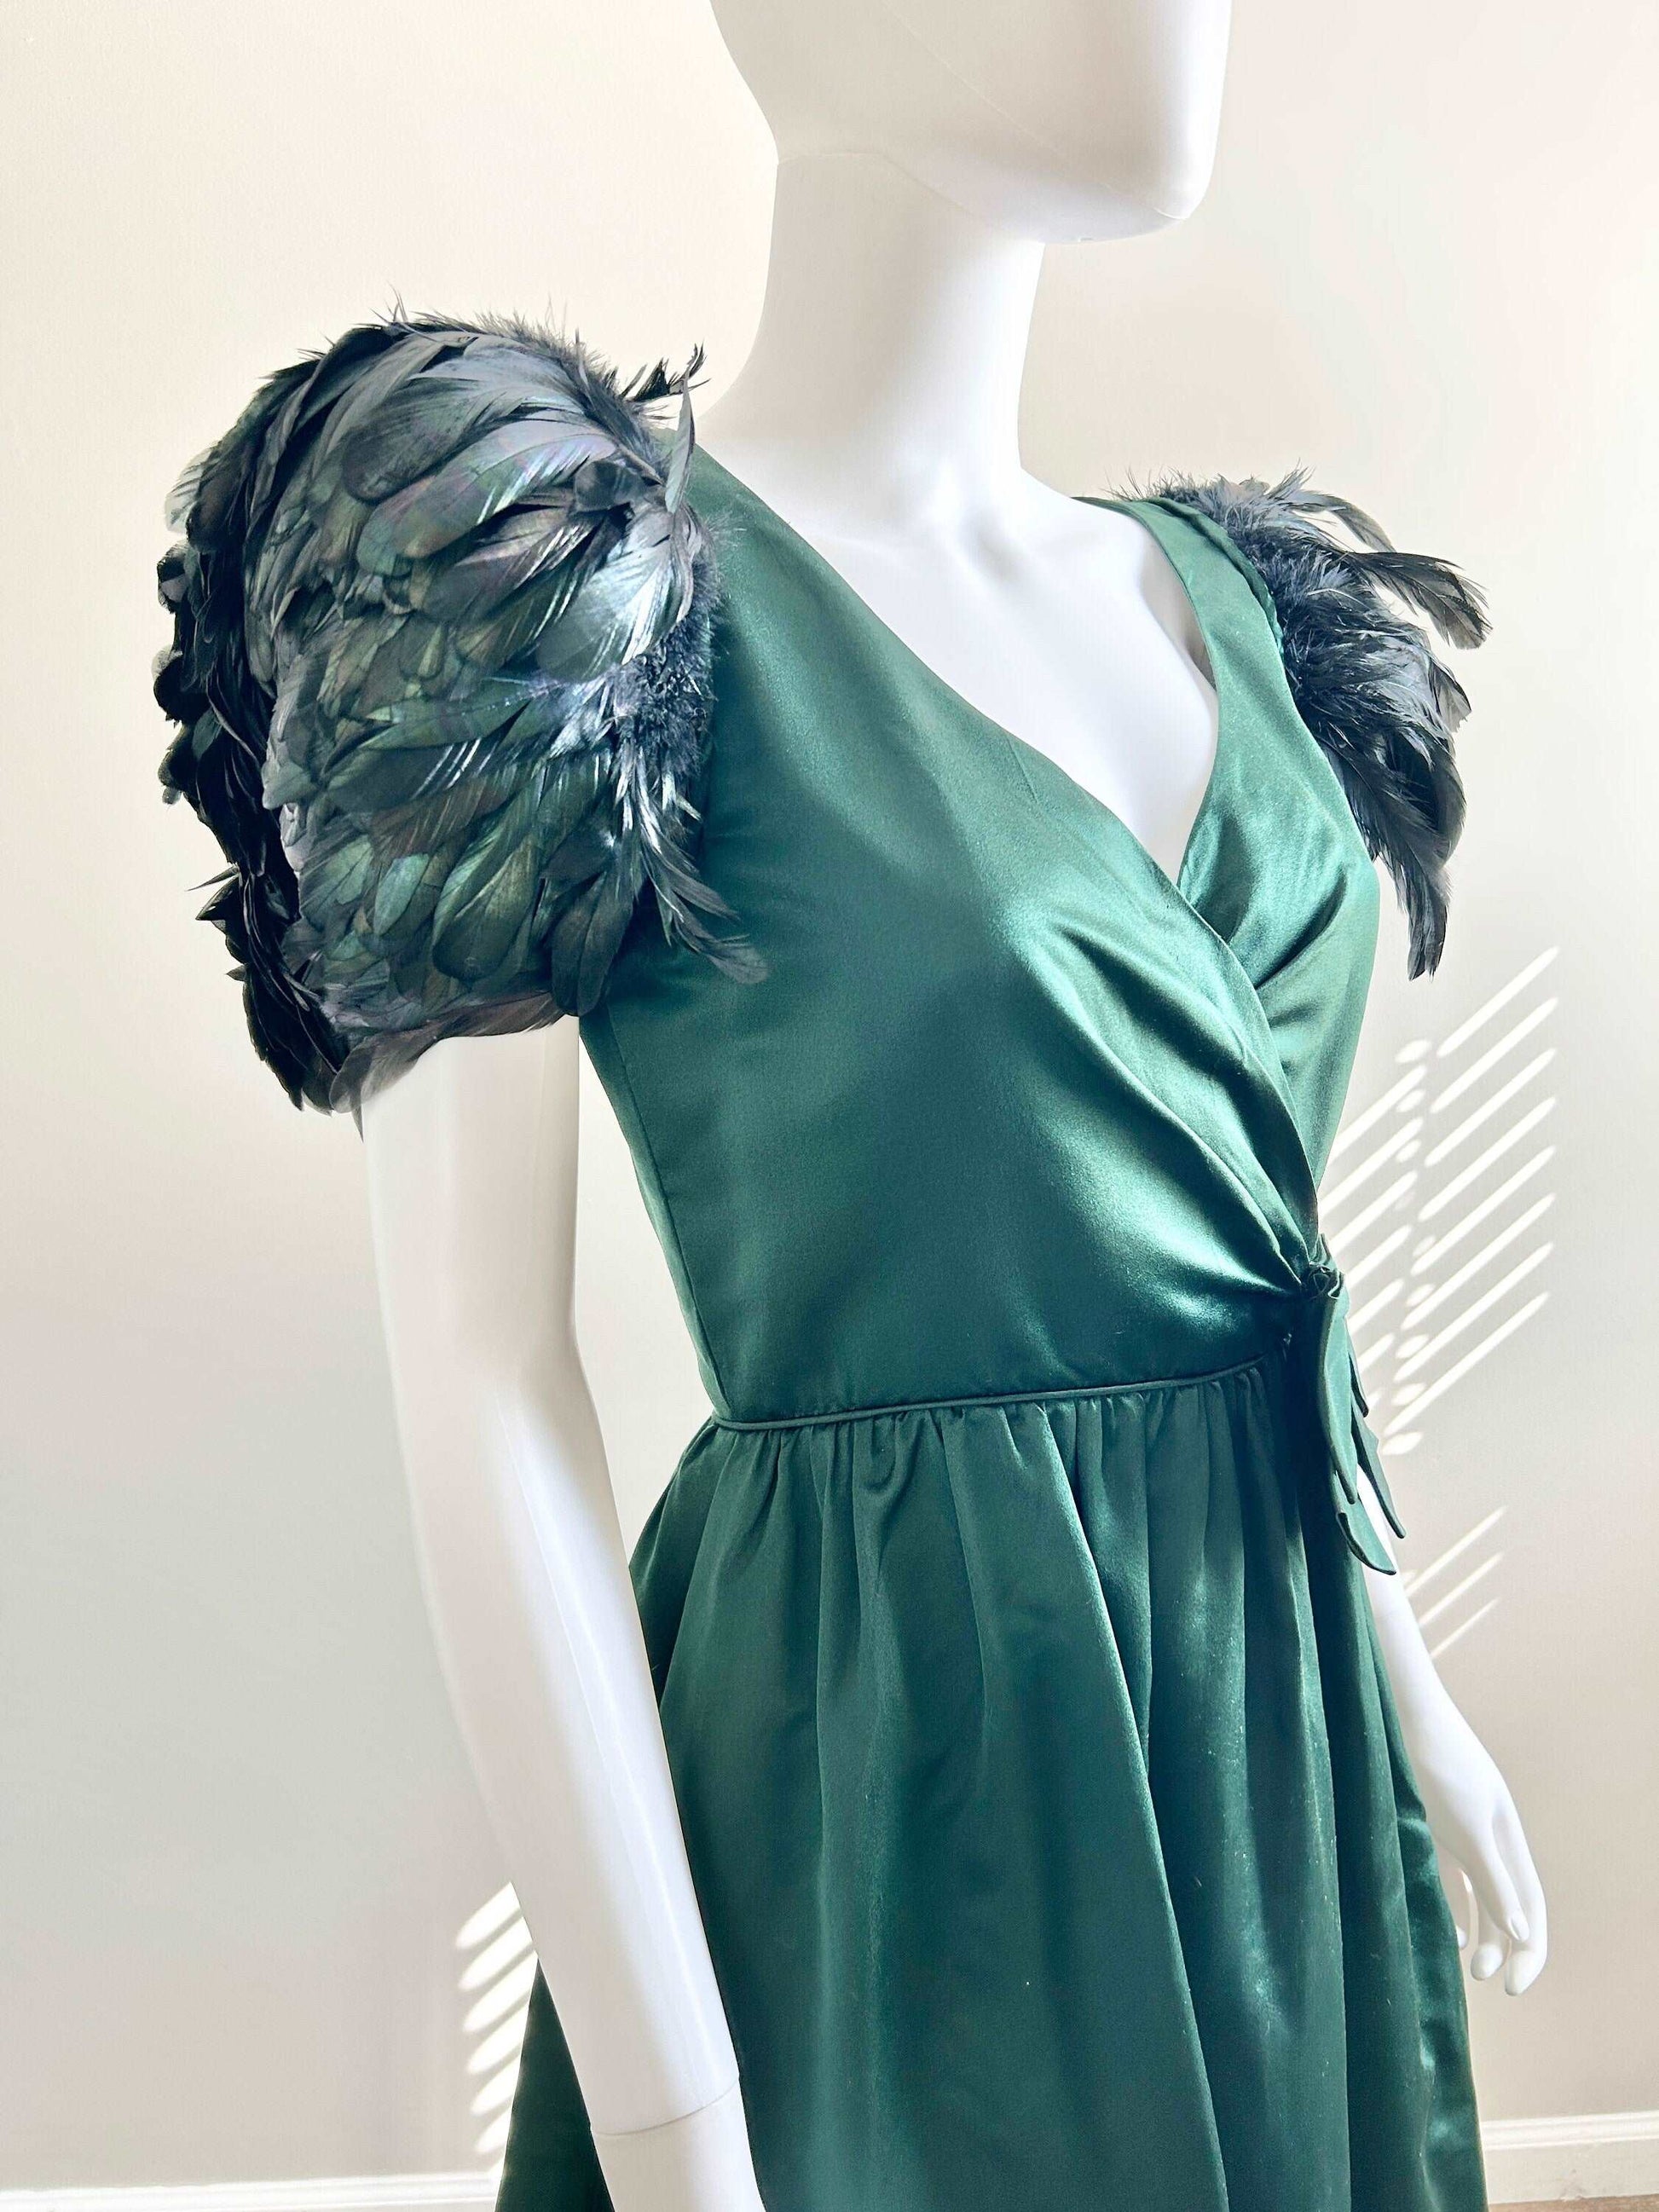 1970s Vintage Couture Green Satin Dress with Feathers / 70s formal dress / 70s Christmas dress / Size S